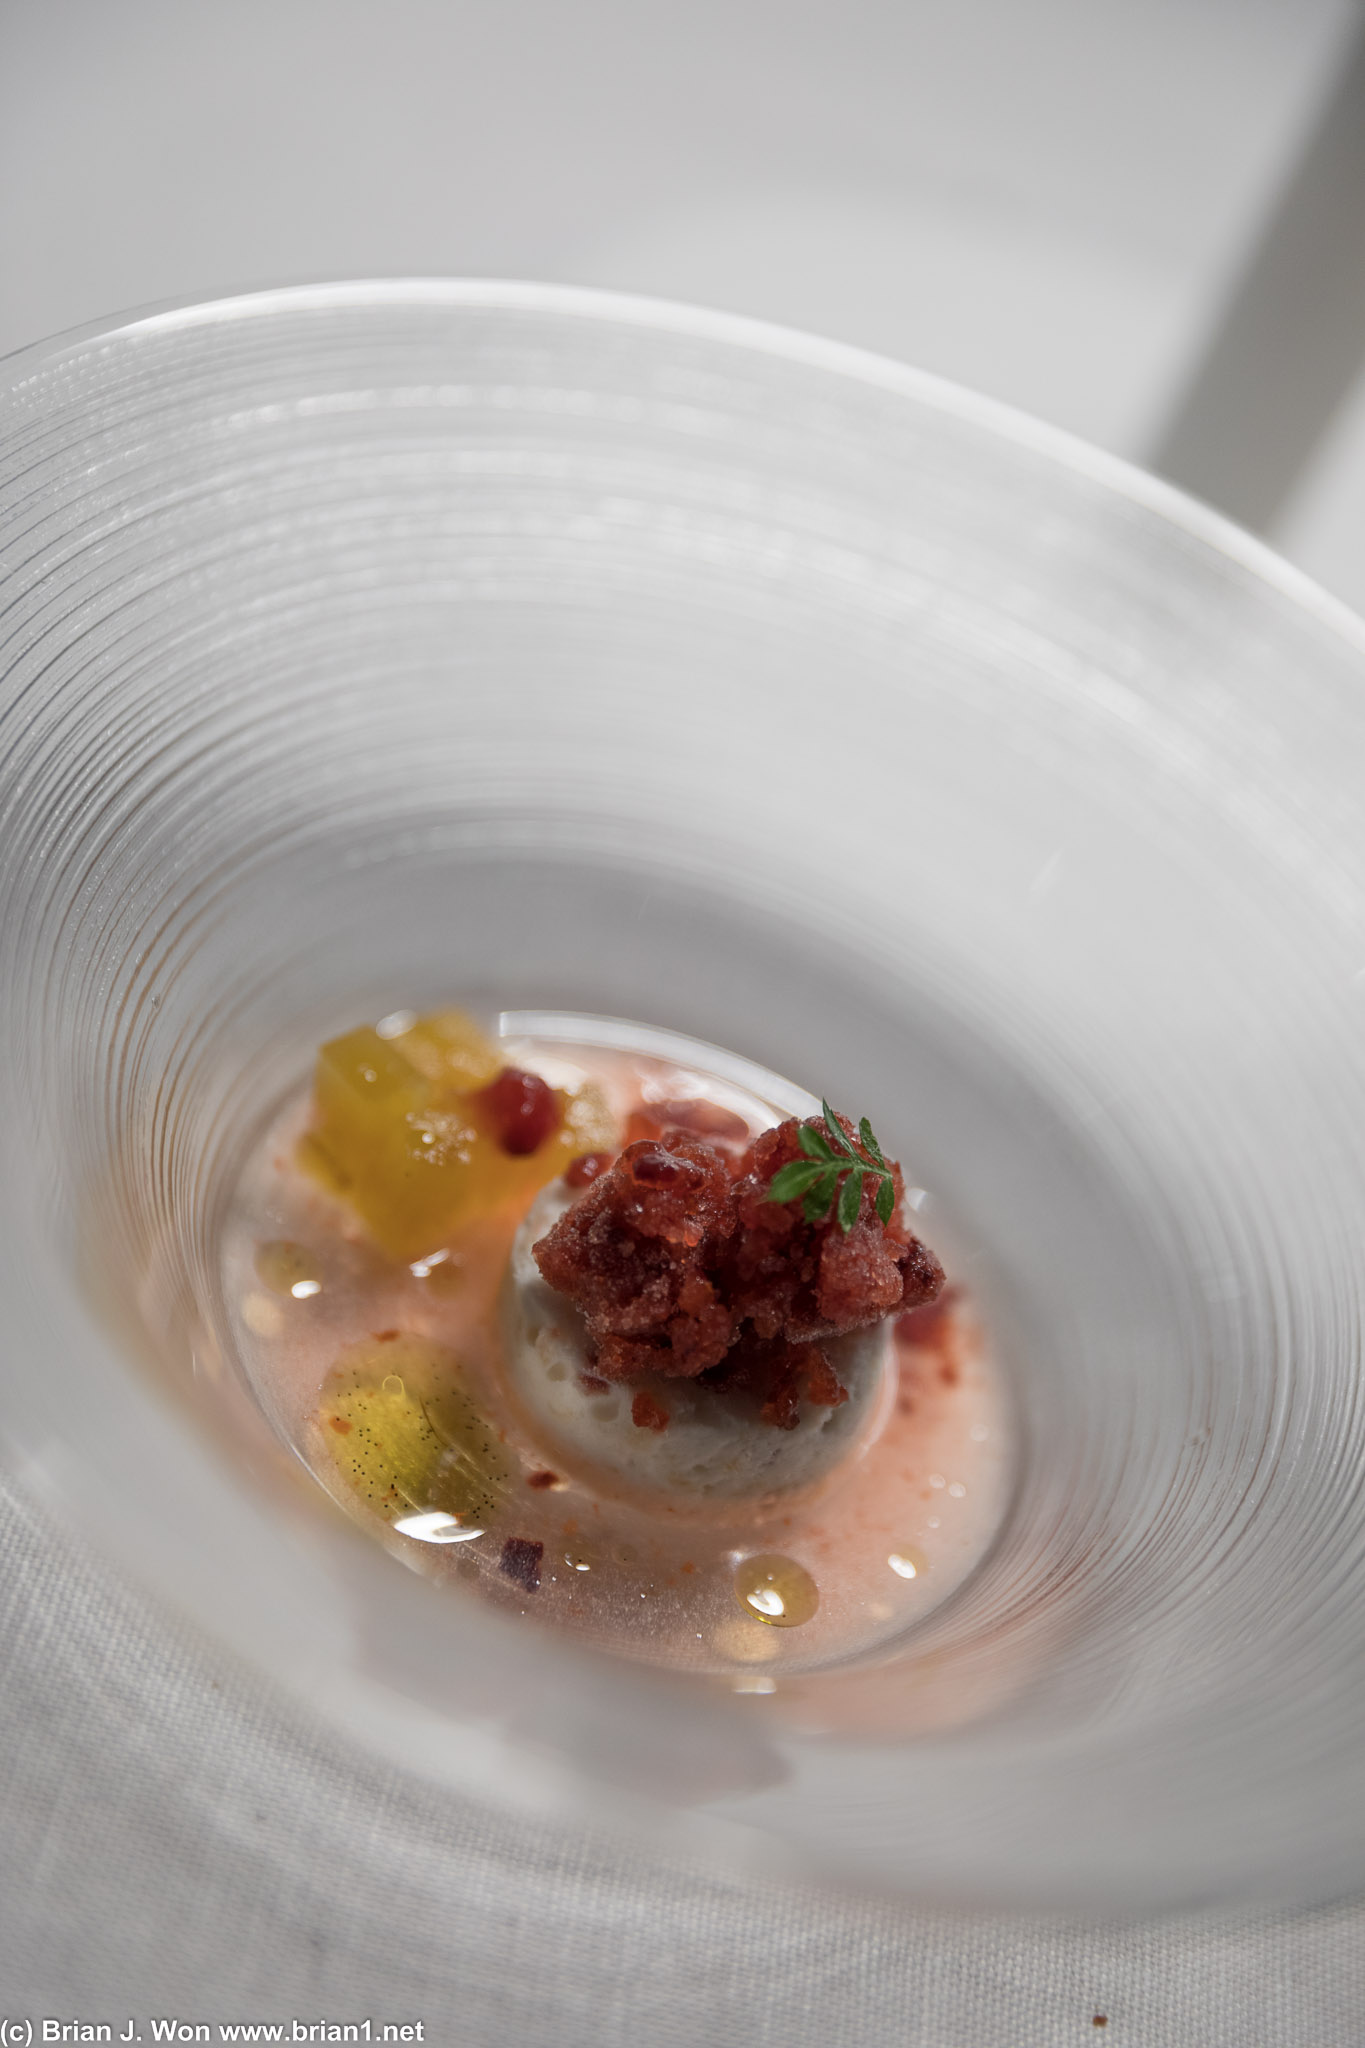 Mousse of peach and plum granita, vanilla oil and...? Good, nice balance of flavors and different levels of sweetness.